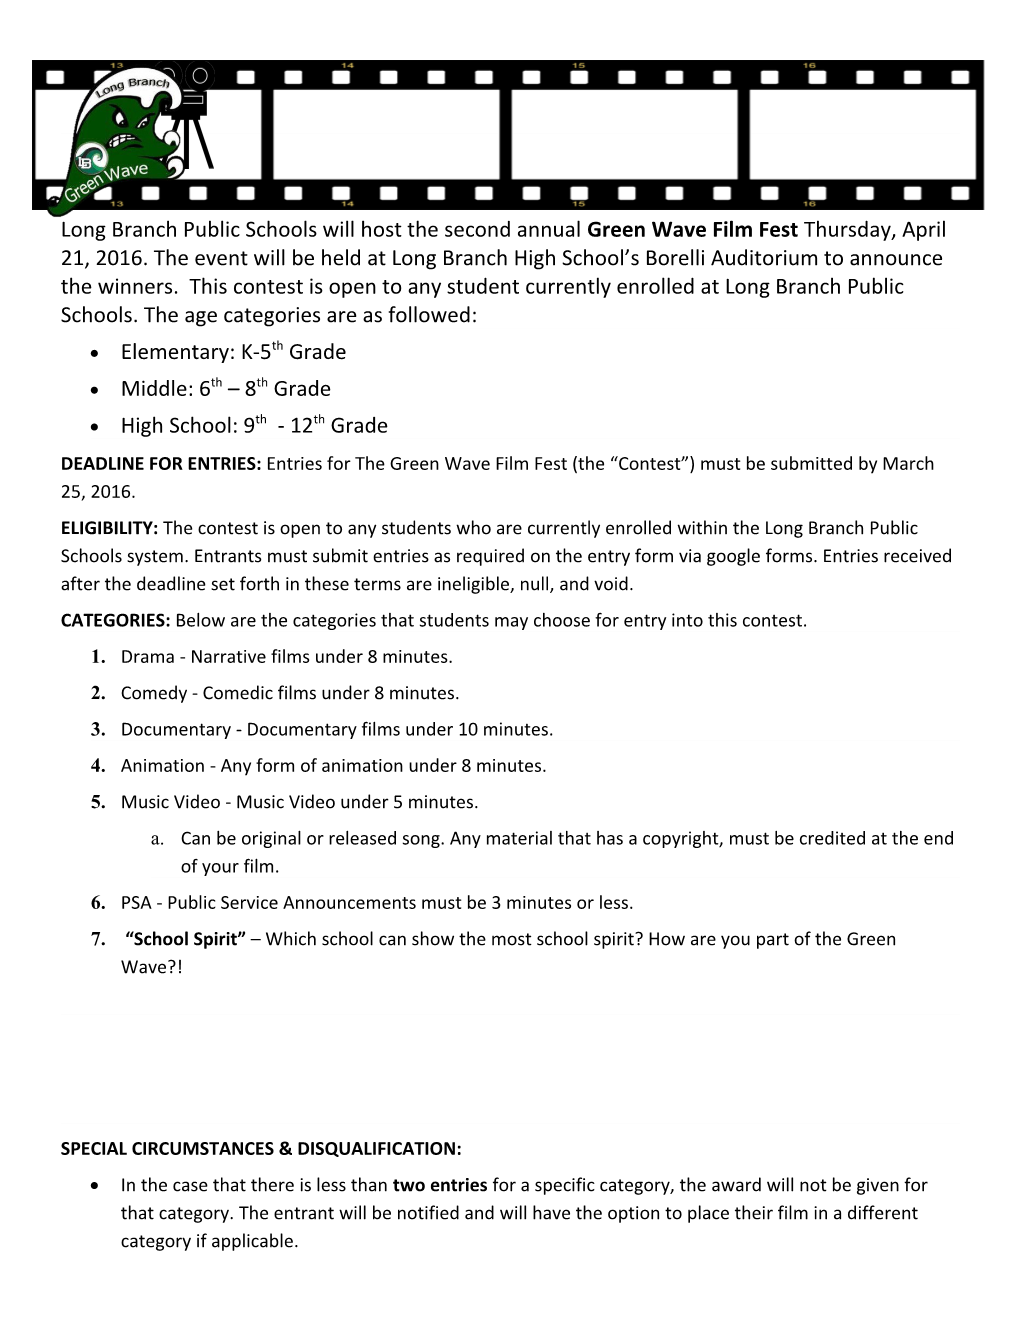 Long Branch Public Schools Will Host the Second Annual Green Wave Film Fest Thursday,April